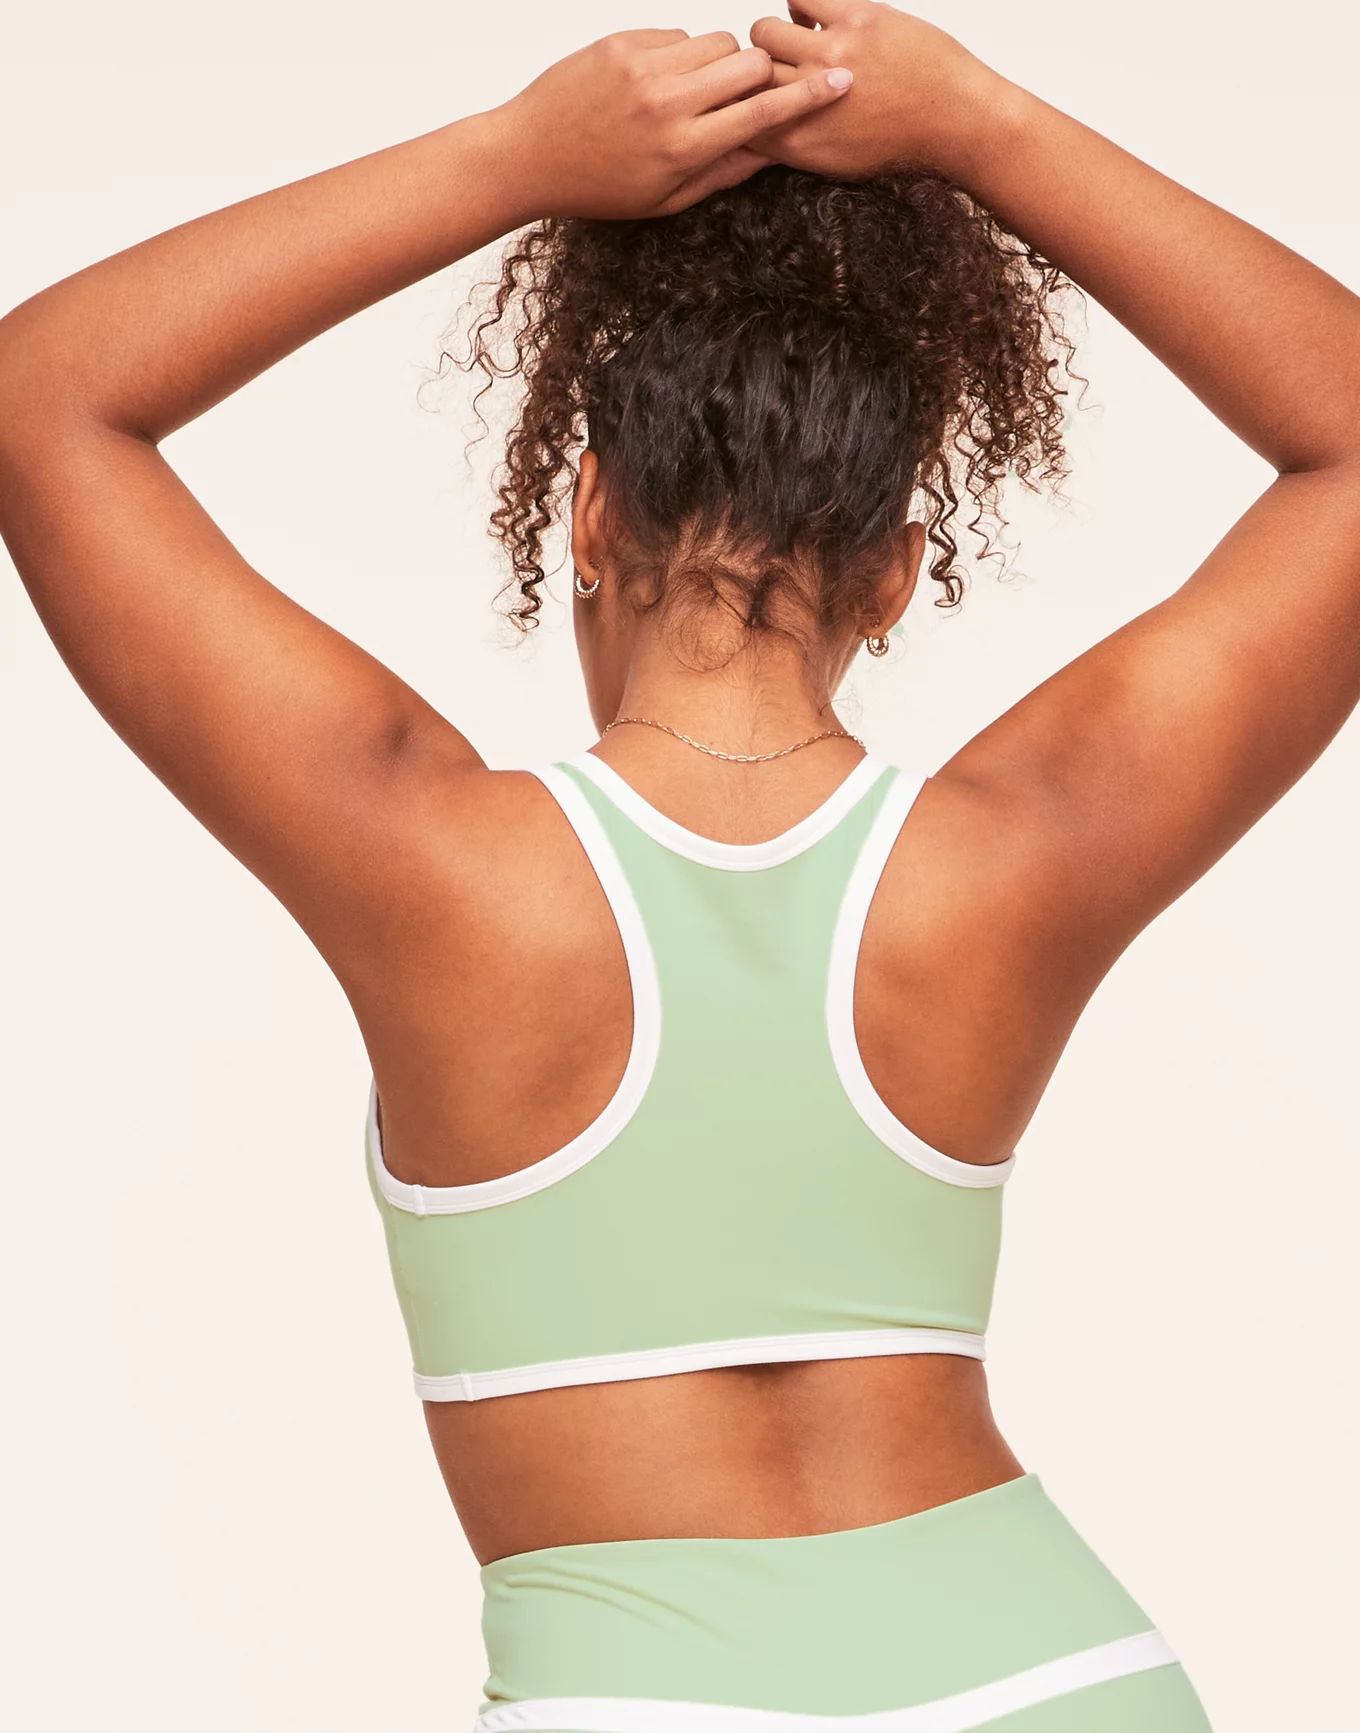 Khaki Green Fitness Bra Top with removable pads, perfect for the gym